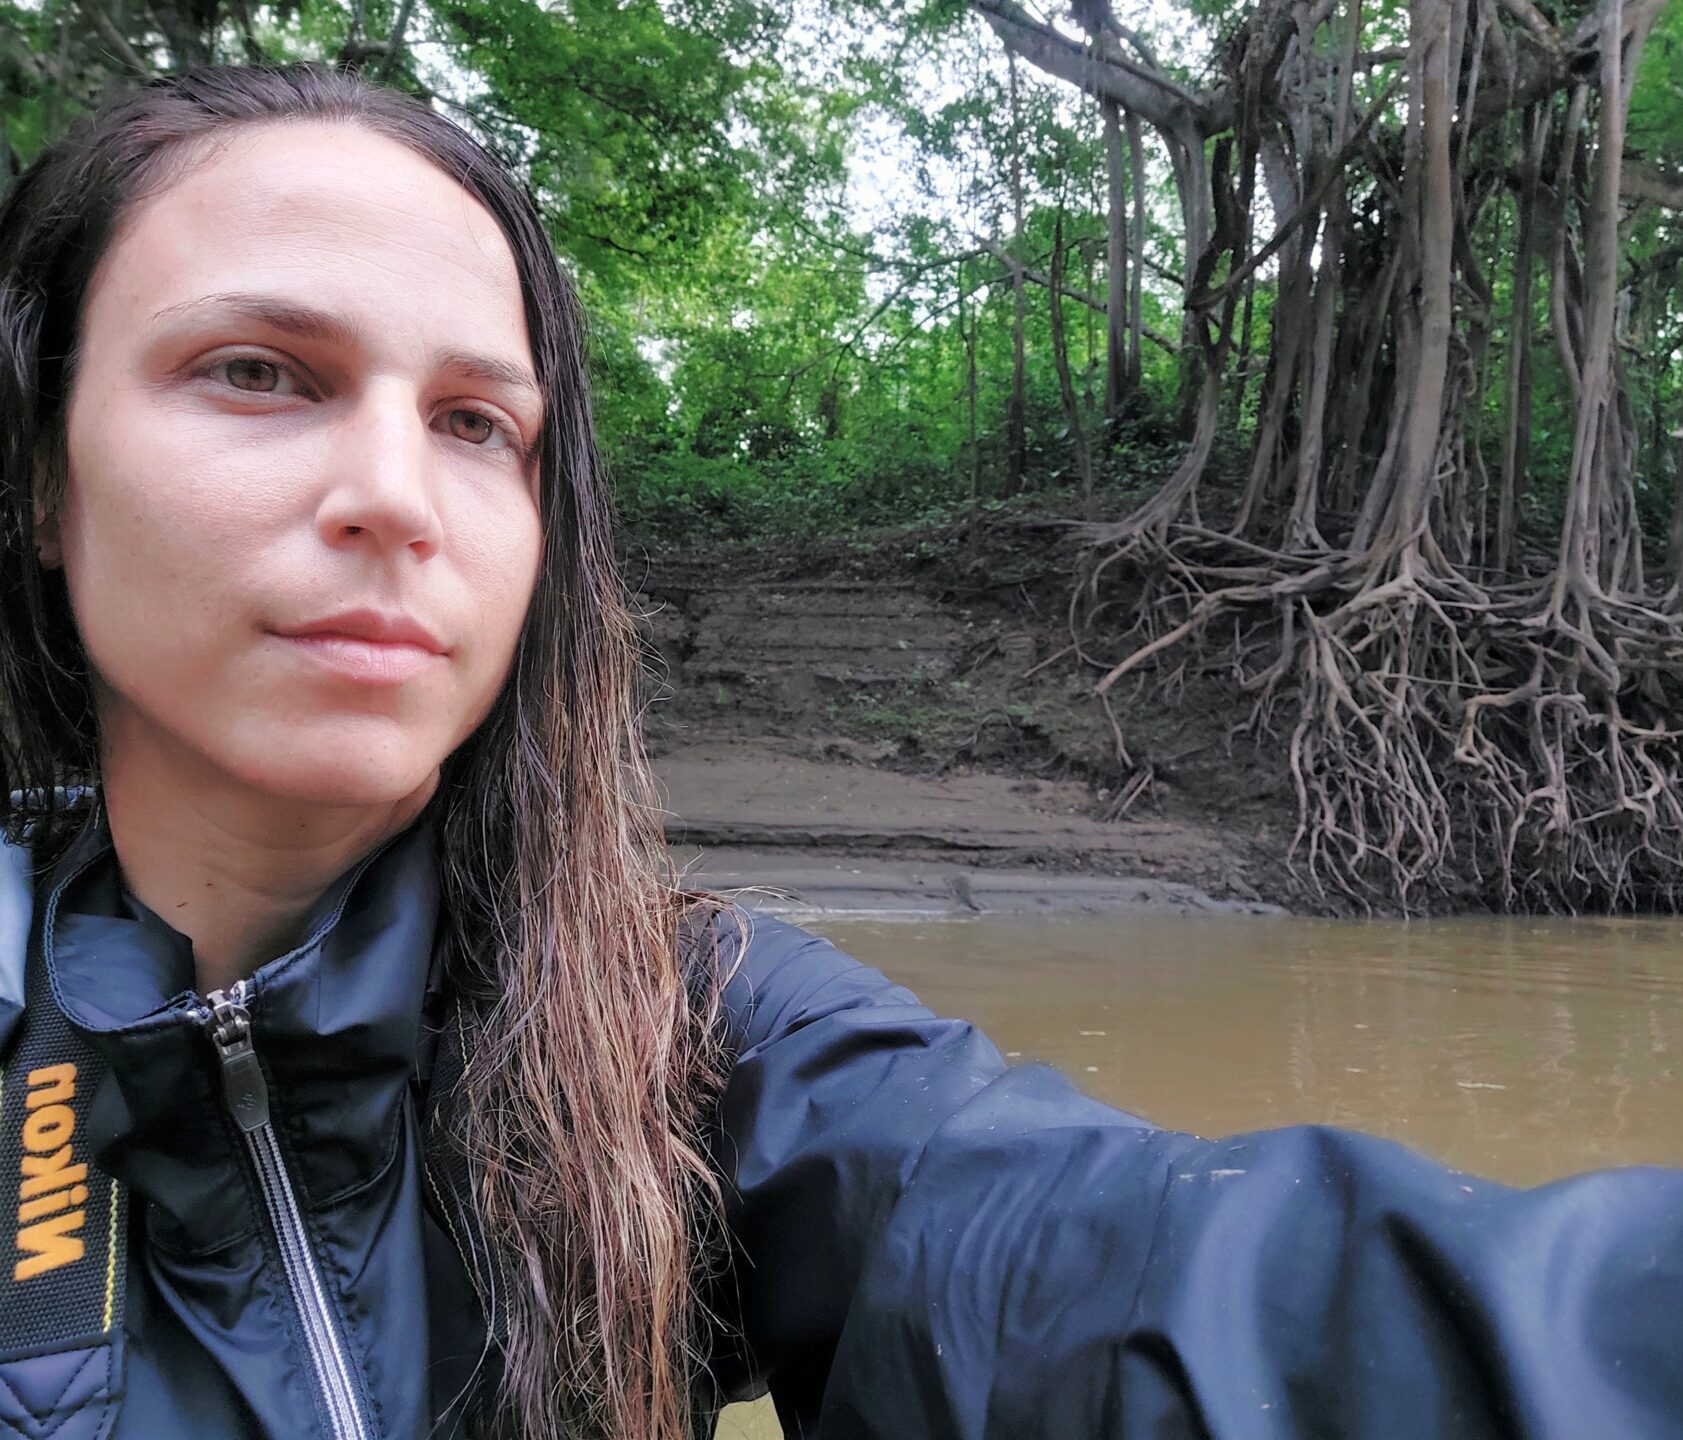 Woman with long brown hair, wearing a dark blue raincoat and a camera around her neck, in front of a muddy river with trees in the background